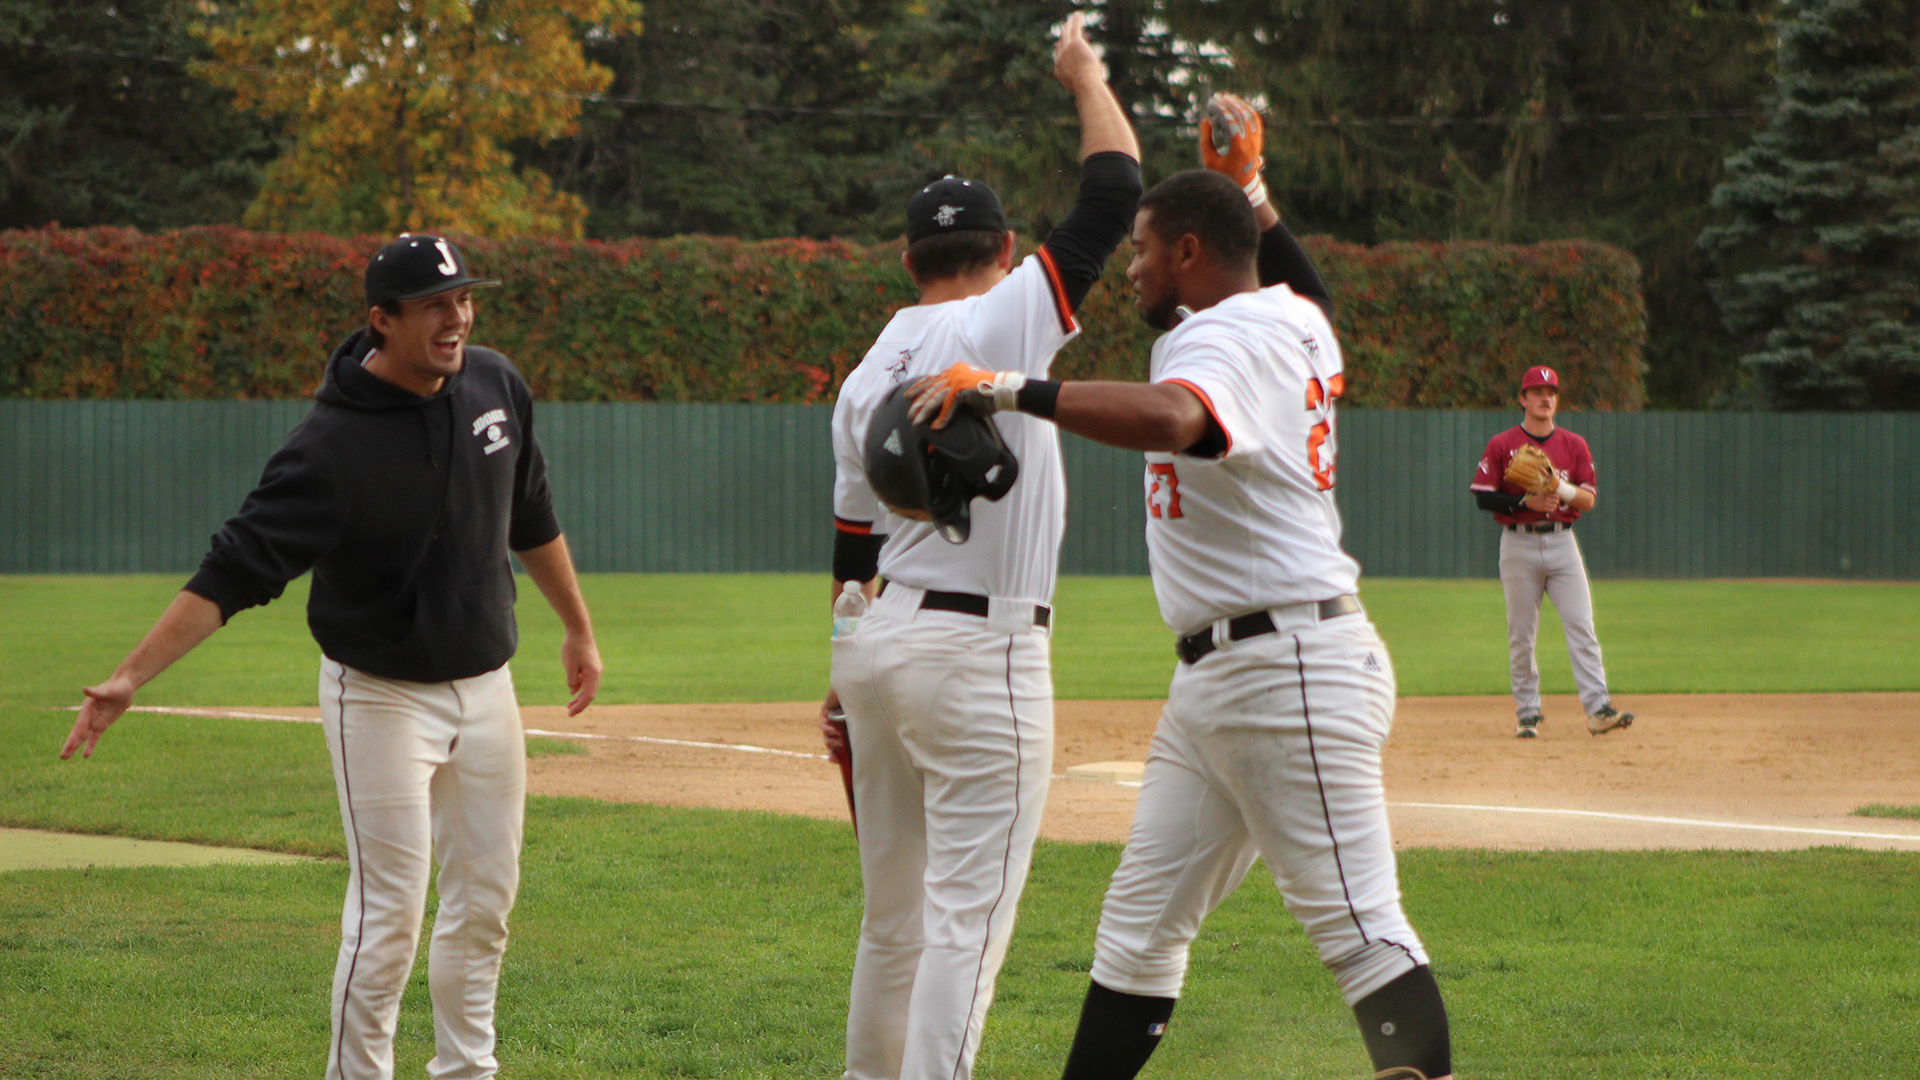 Jimmies wrap up fall season with win over VCSU